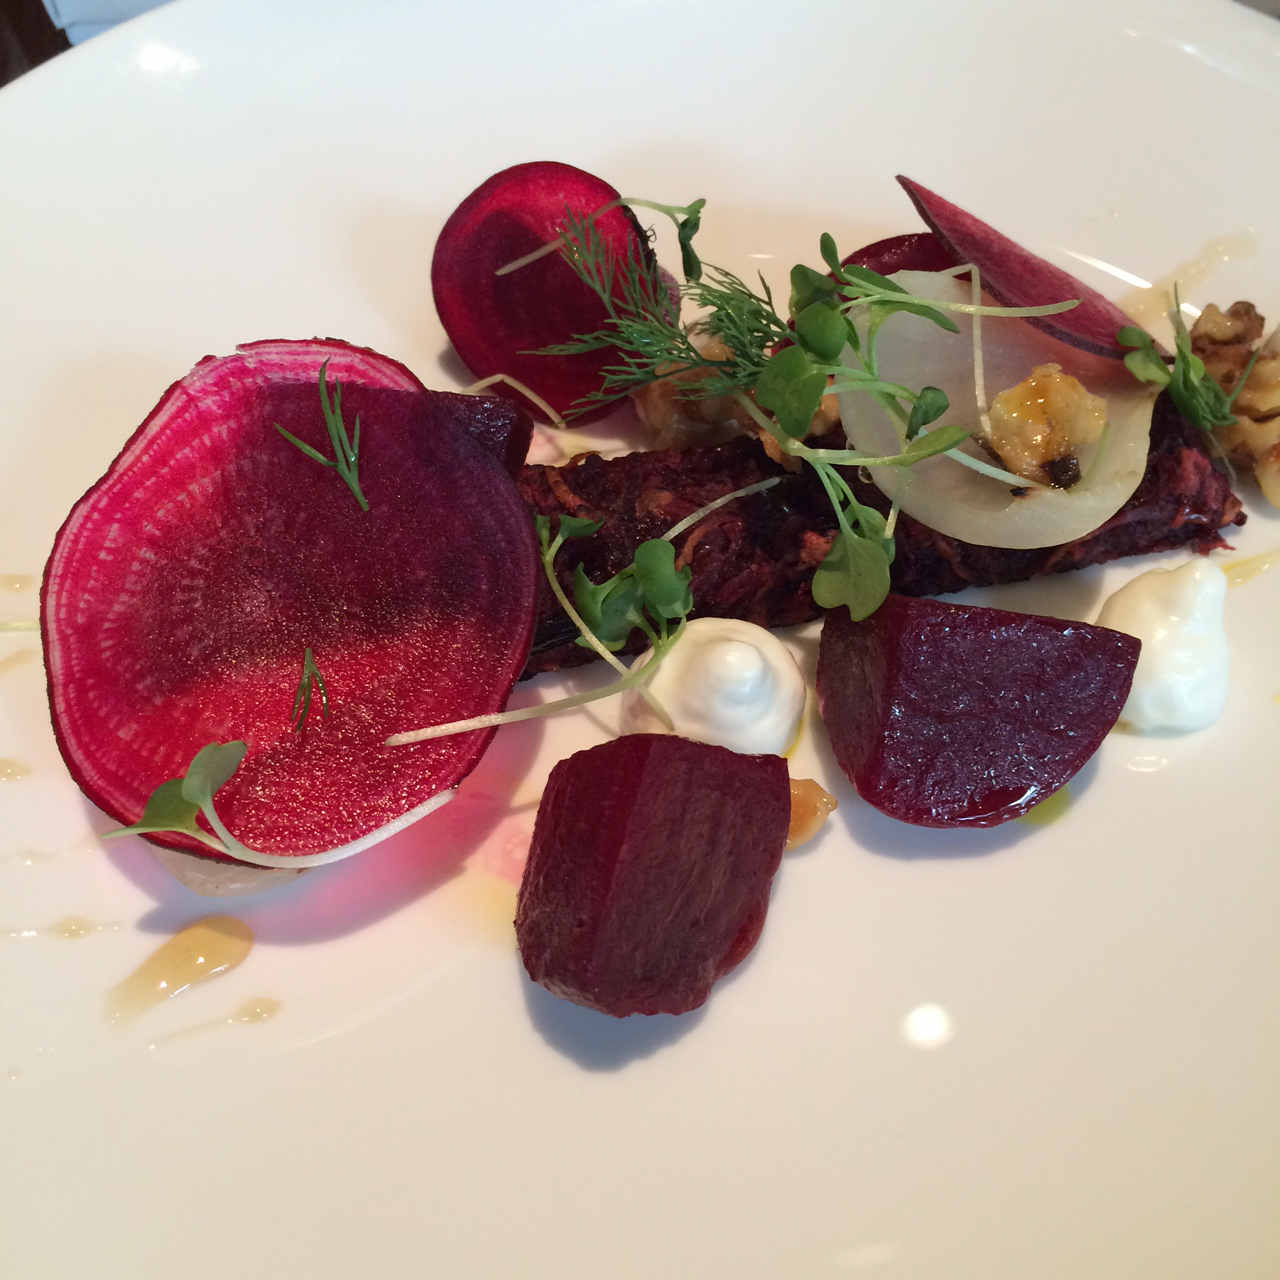 Beetroot and potato cake with goat cheese, sweet and sour honey and walnuts